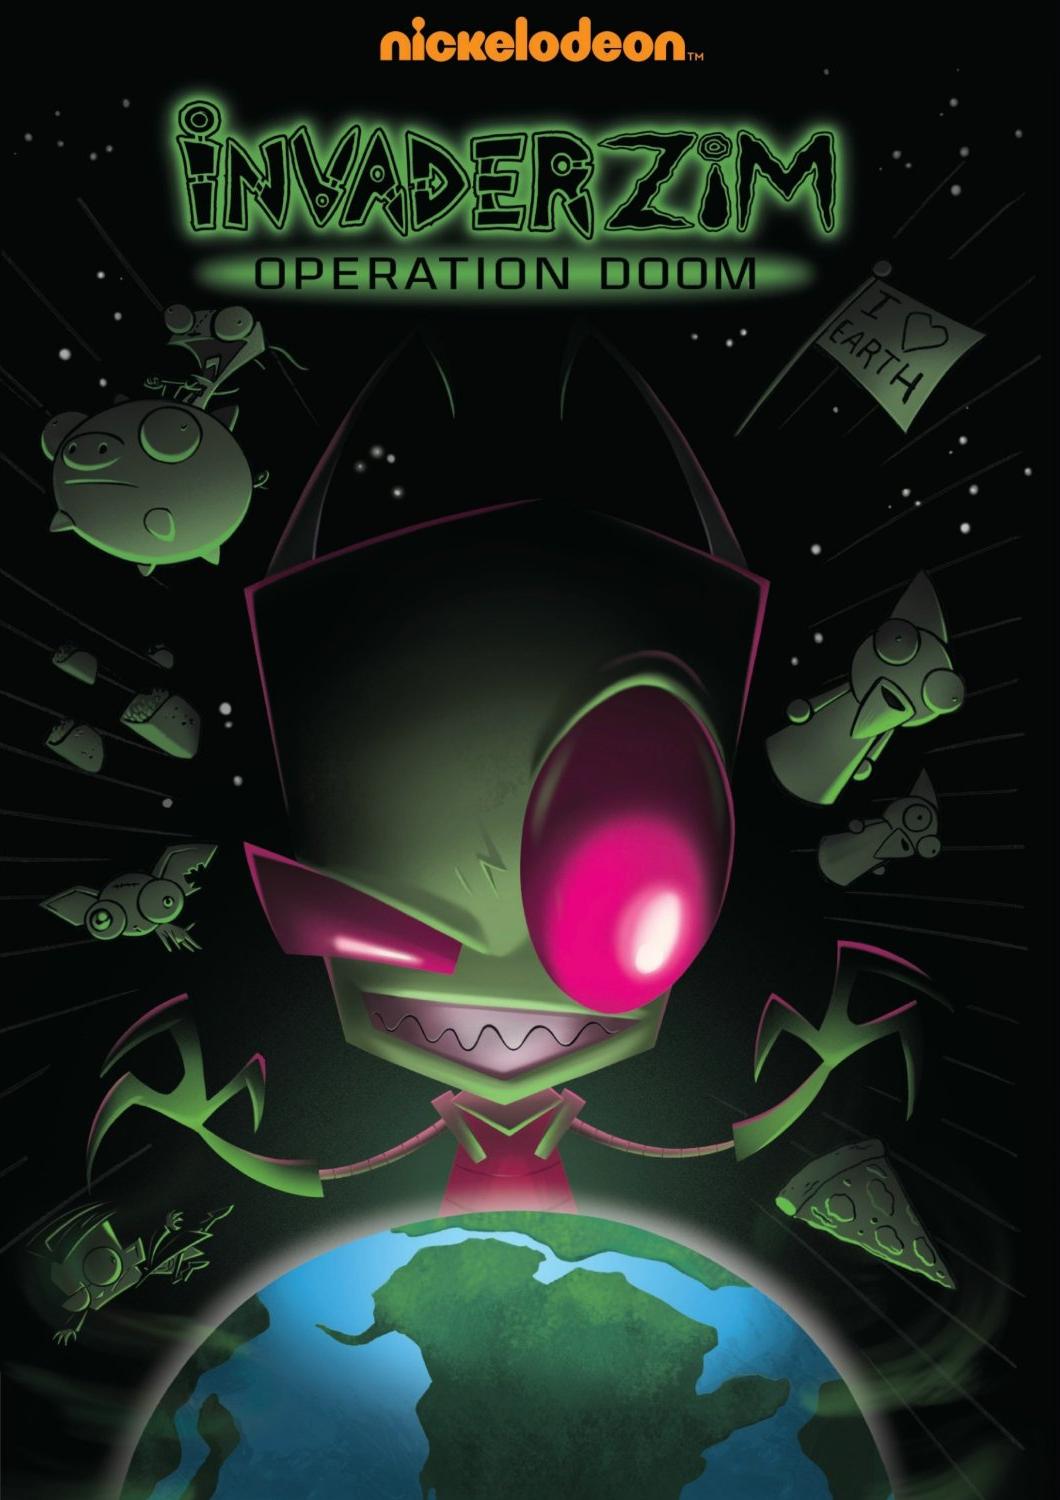 Invader Zim videography | Nickelodeon | FANDOM powered by Wikia